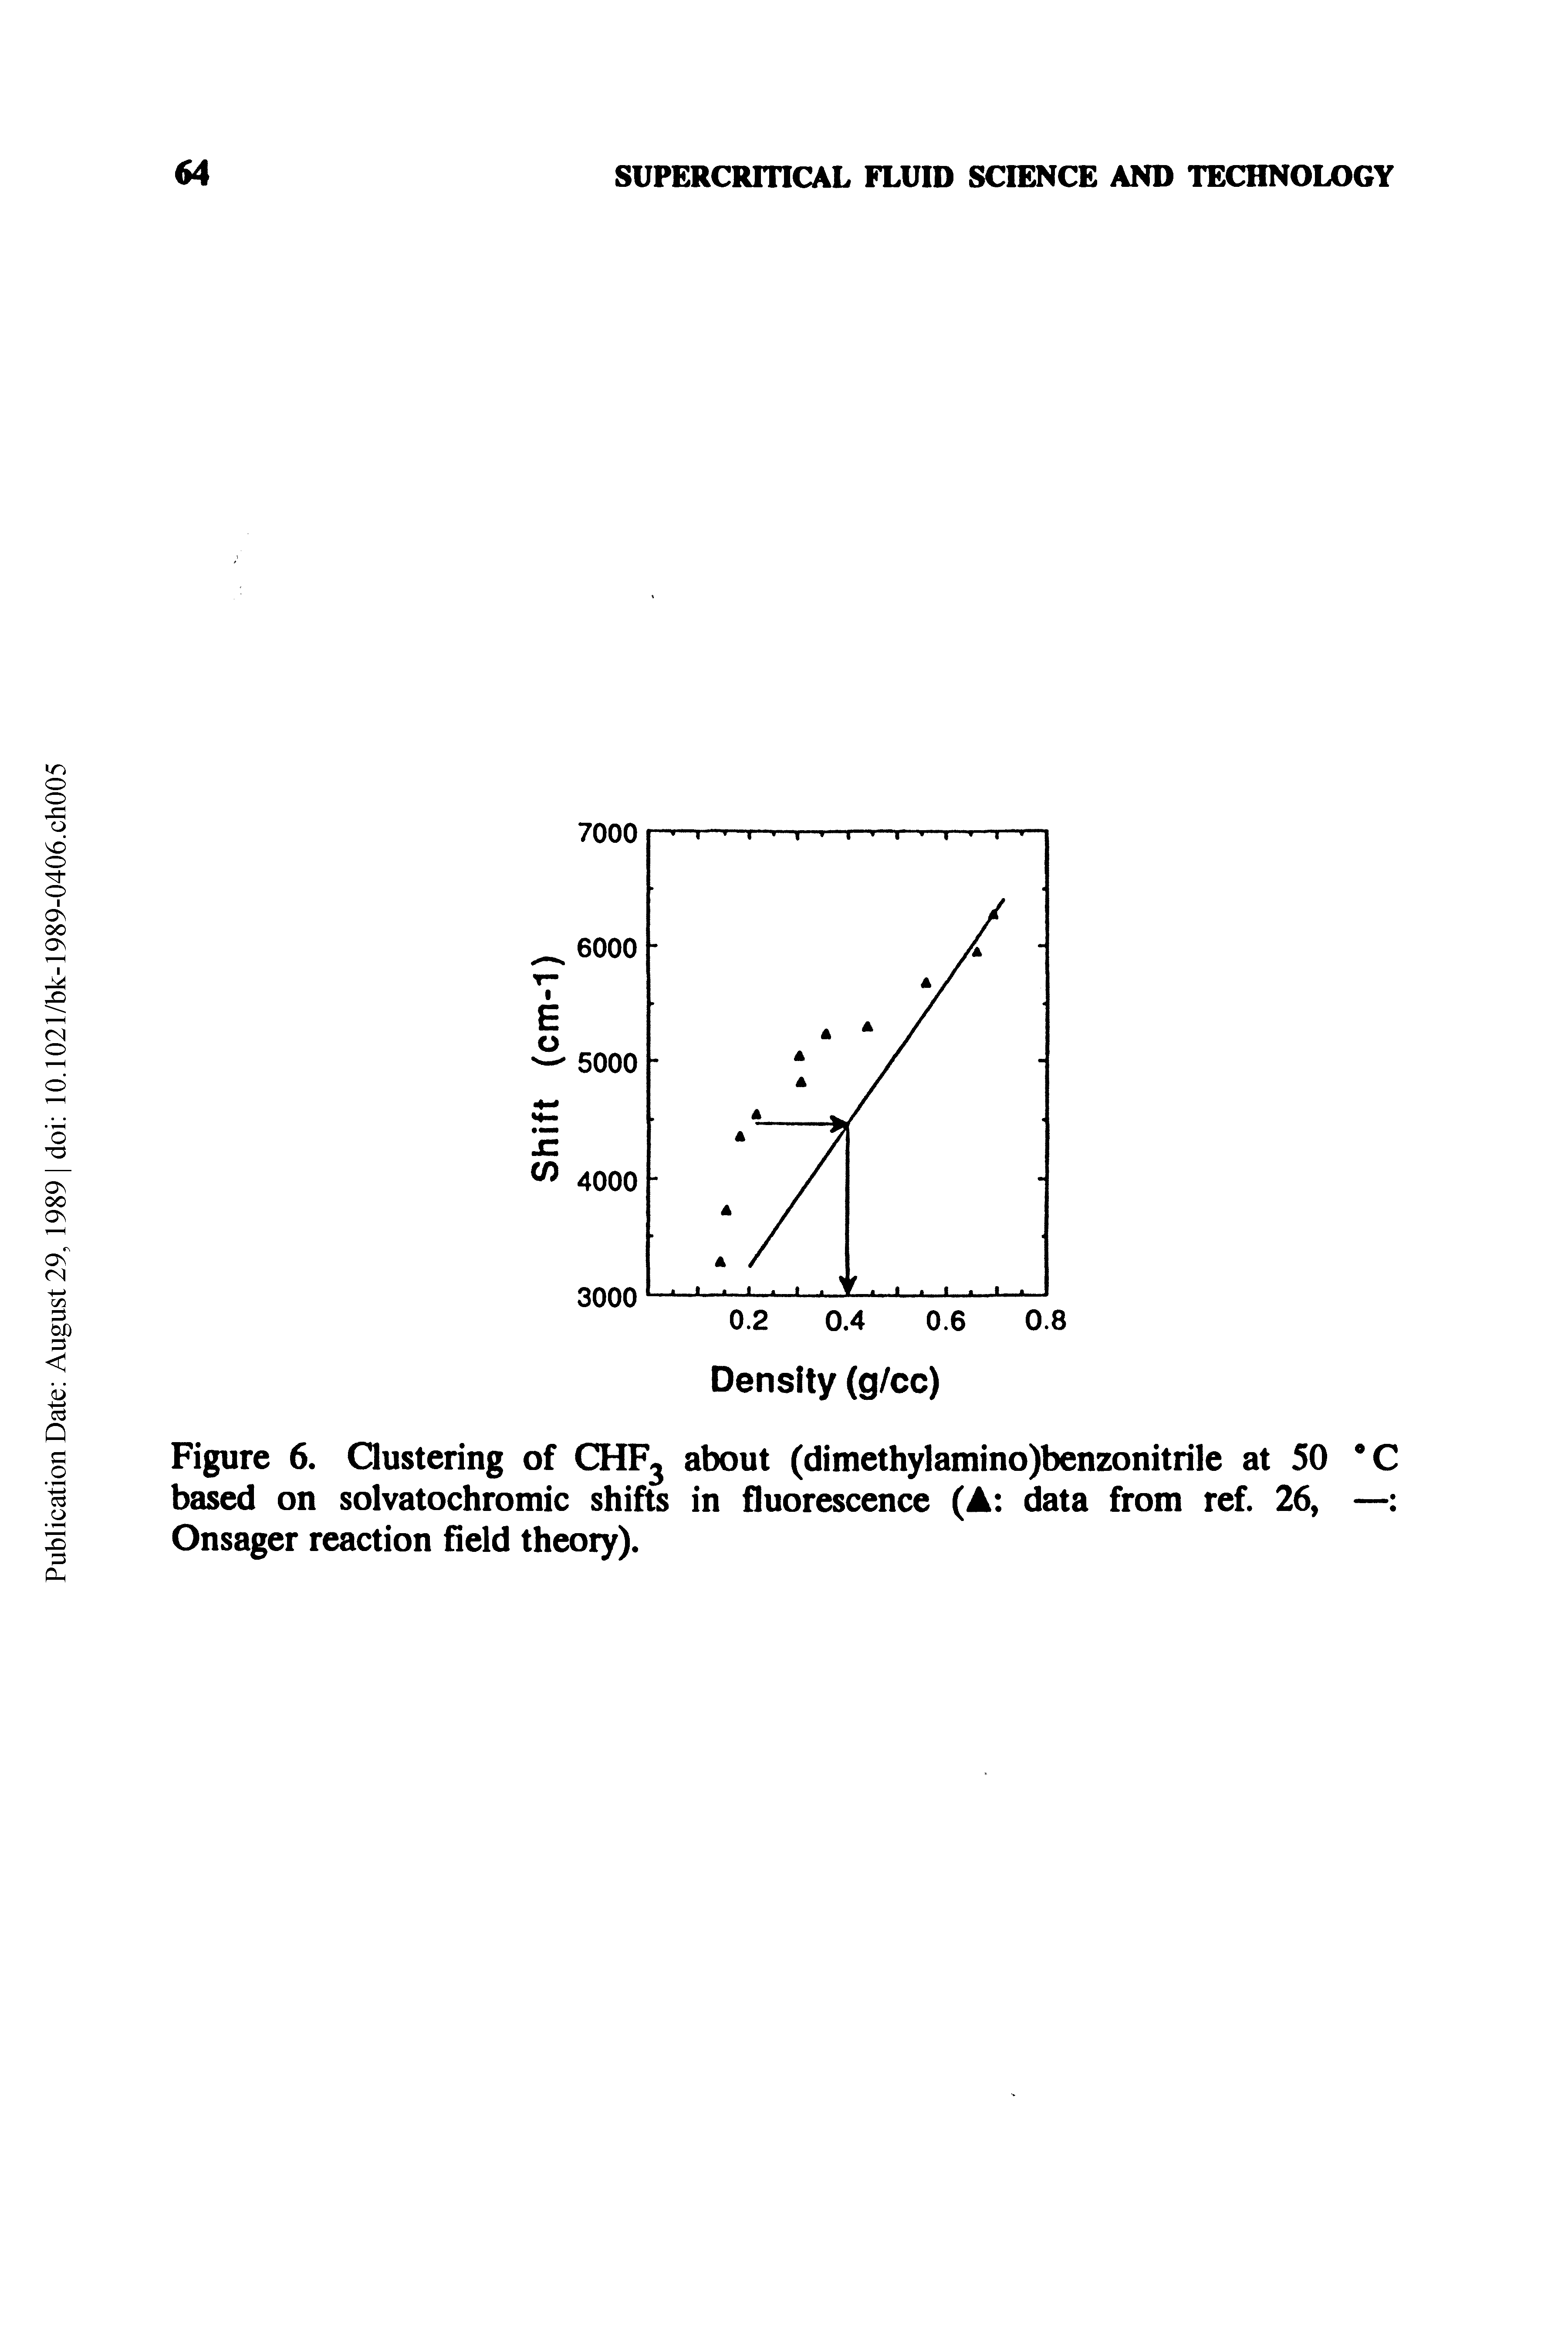 Figure 6. Qustering of CHFj about (dimethylamino)benzonitrile at 50 C based on solvatochromic shifts in fluorescence (A data from ref. 26, — Onsager reaction field theory).